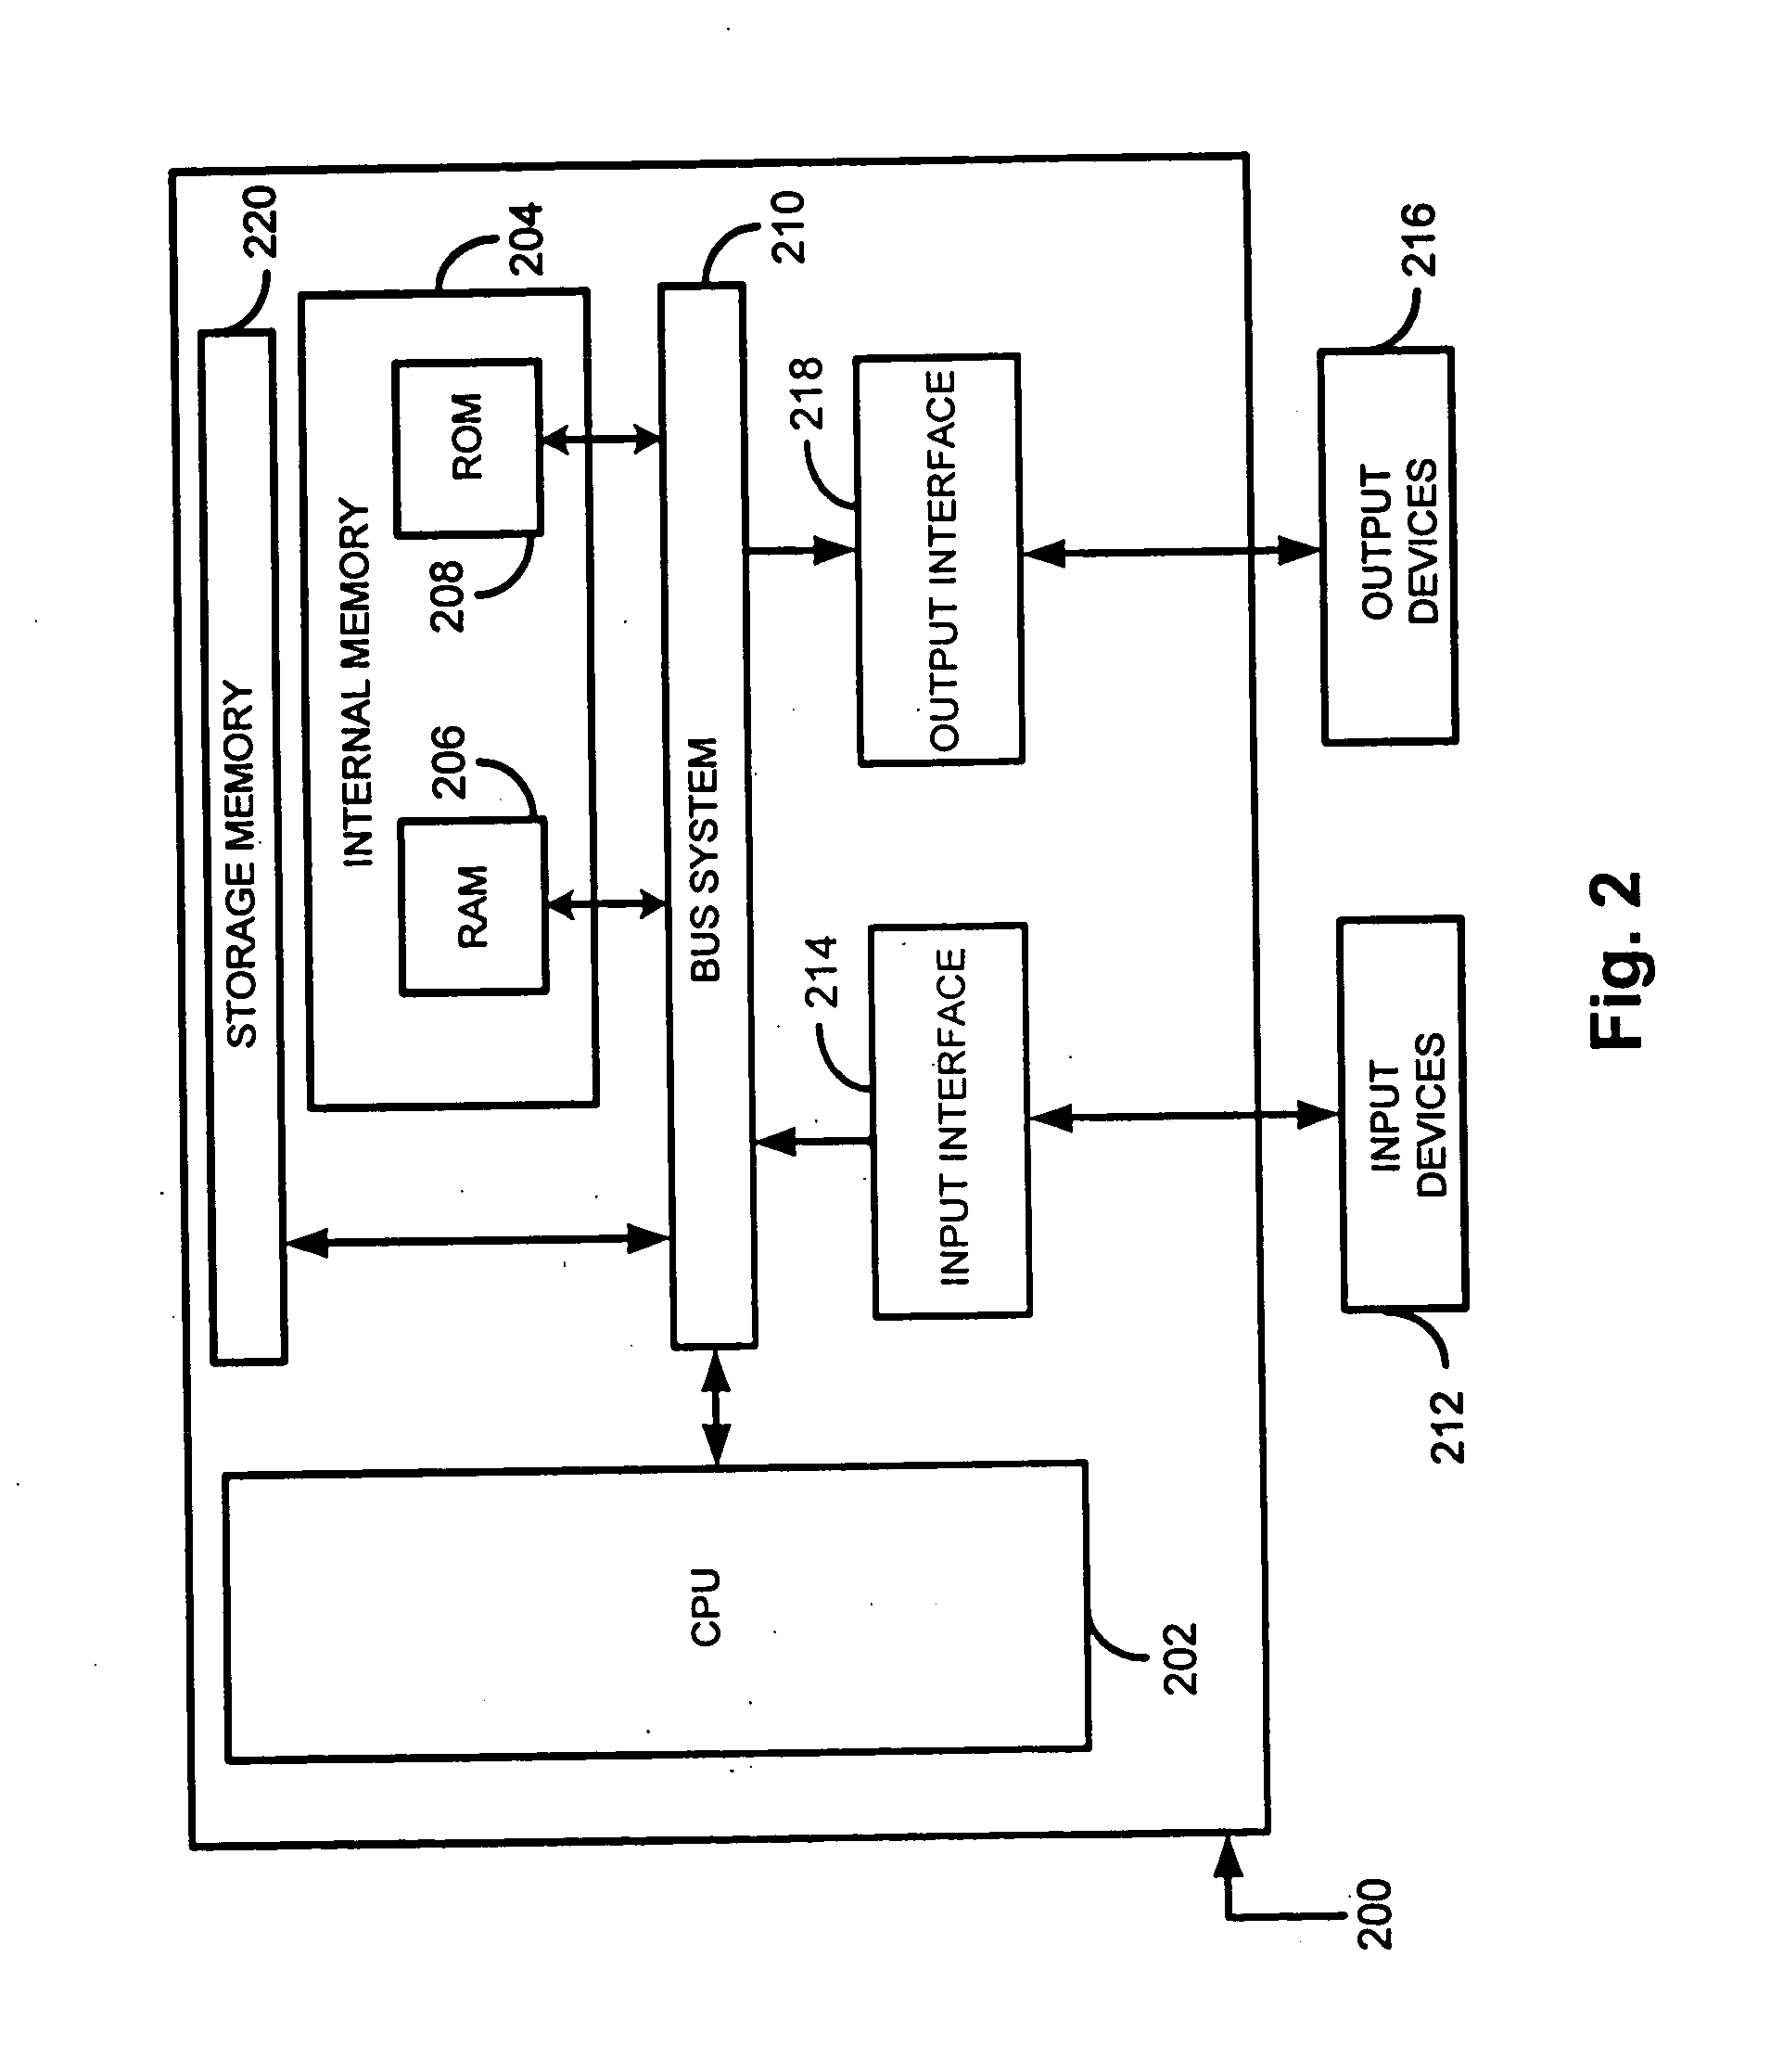 Method for three-dimensional inventory link